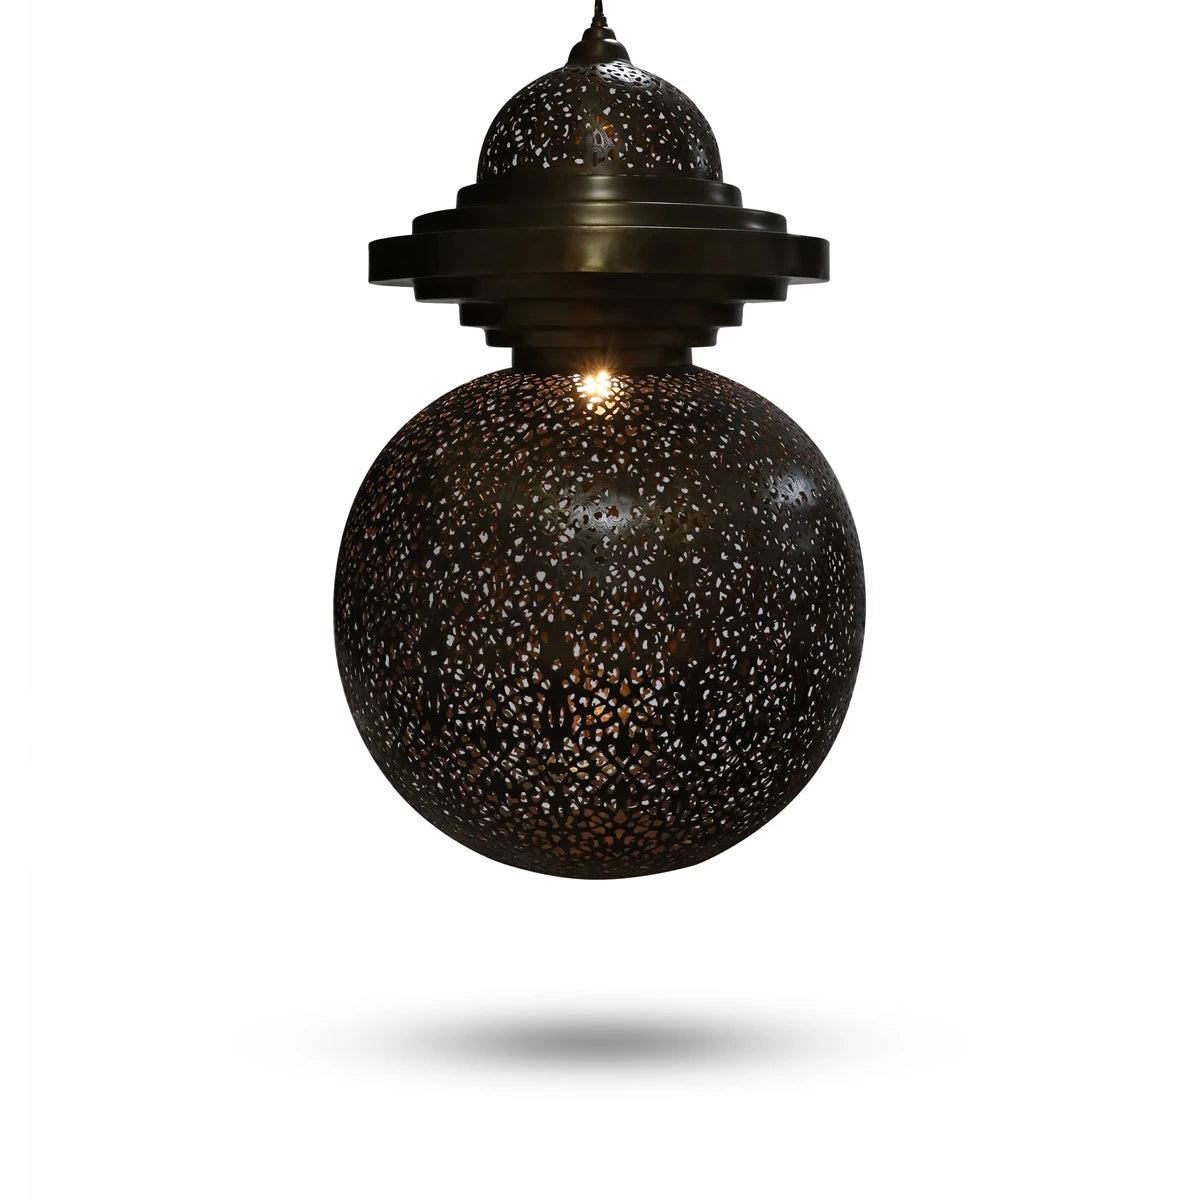 Front View of Perforated Spherical Lantern with Bulbs On